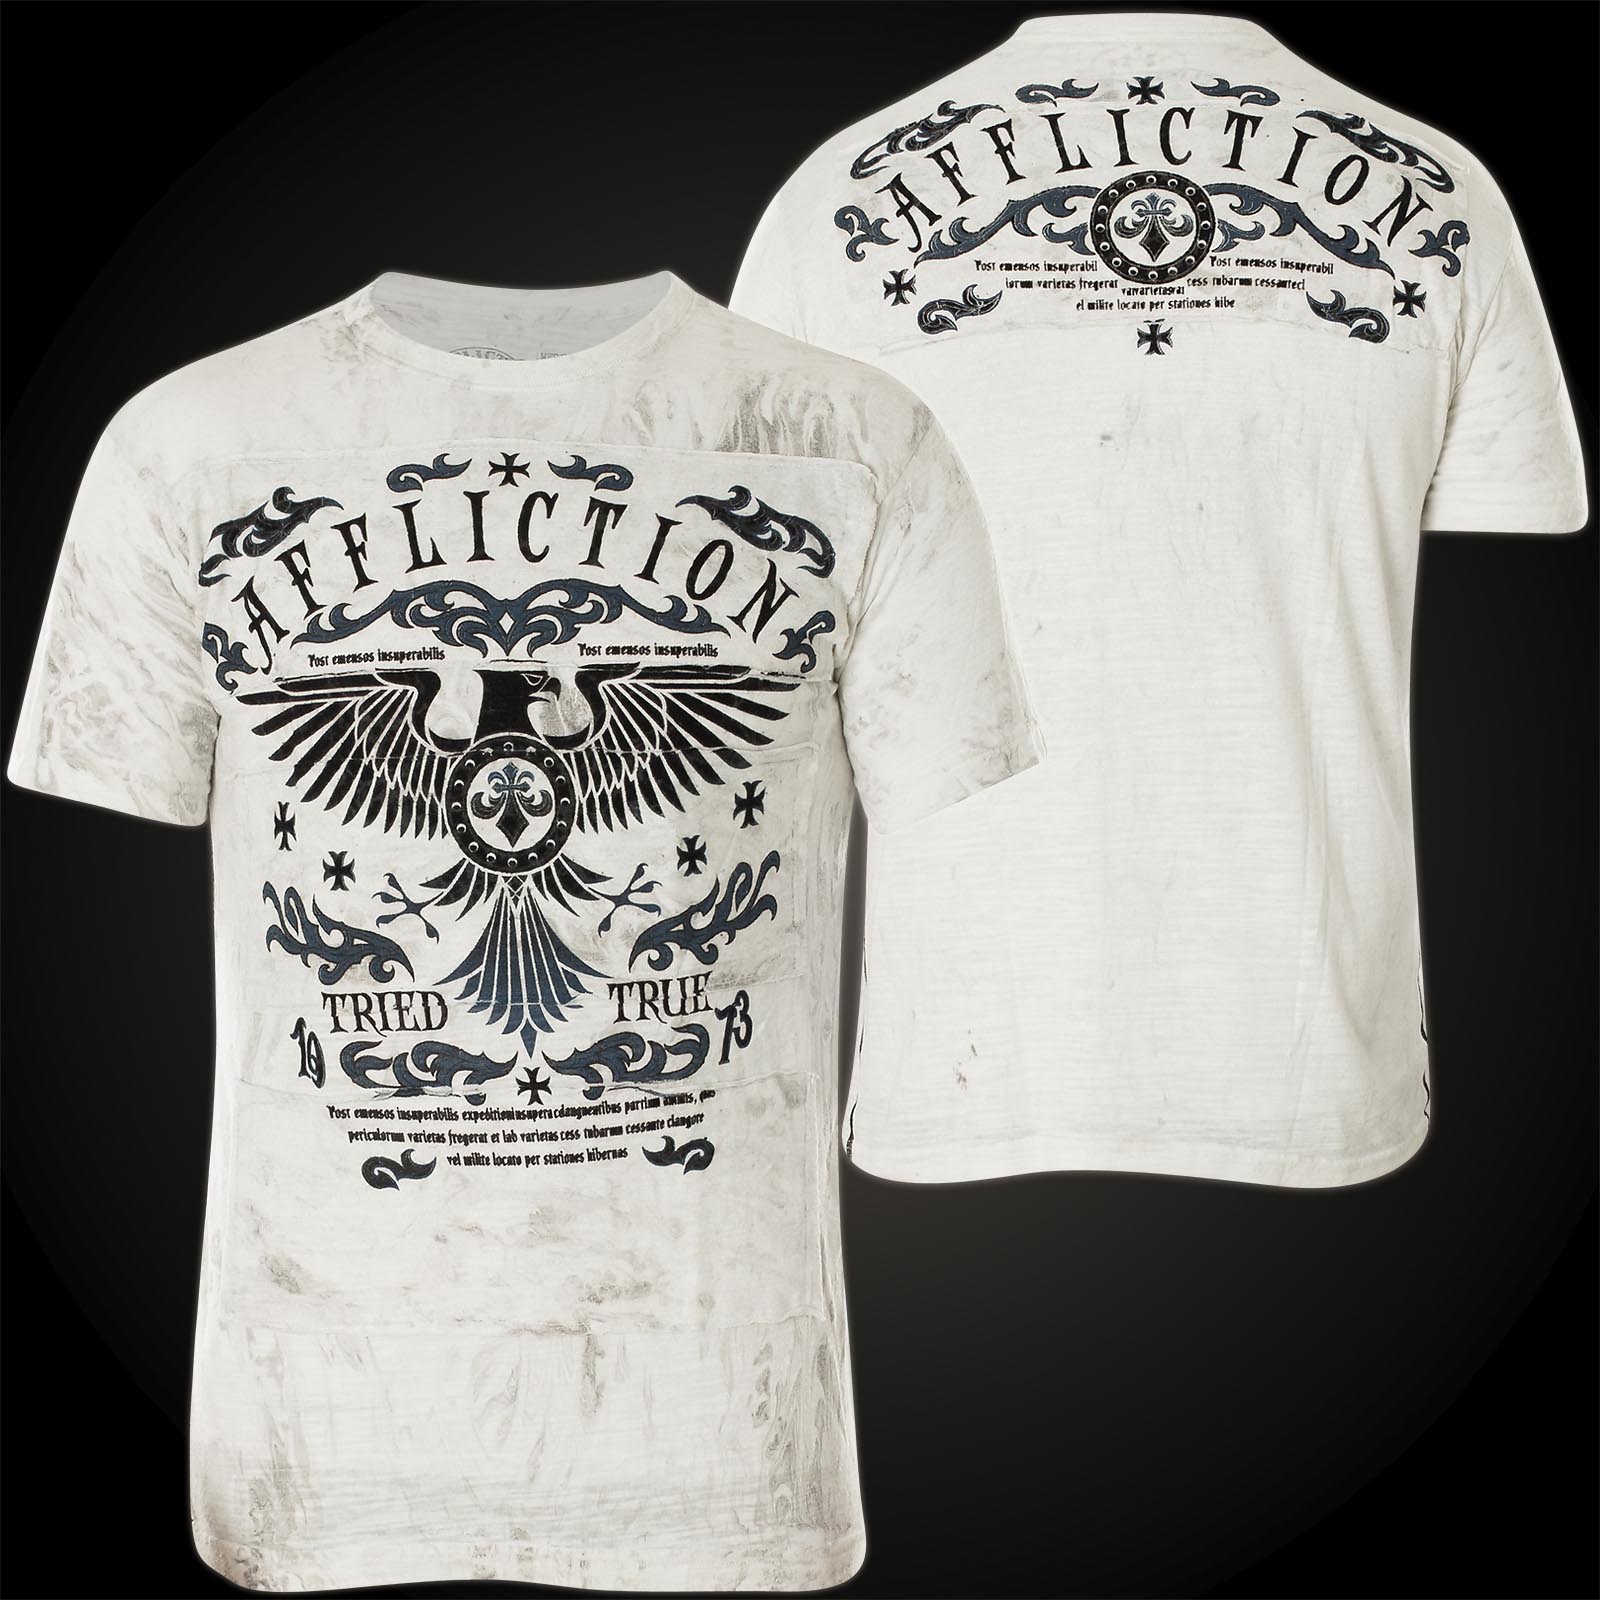 Affliction Tried Eagle T-shirt Print featuring a decorated bird